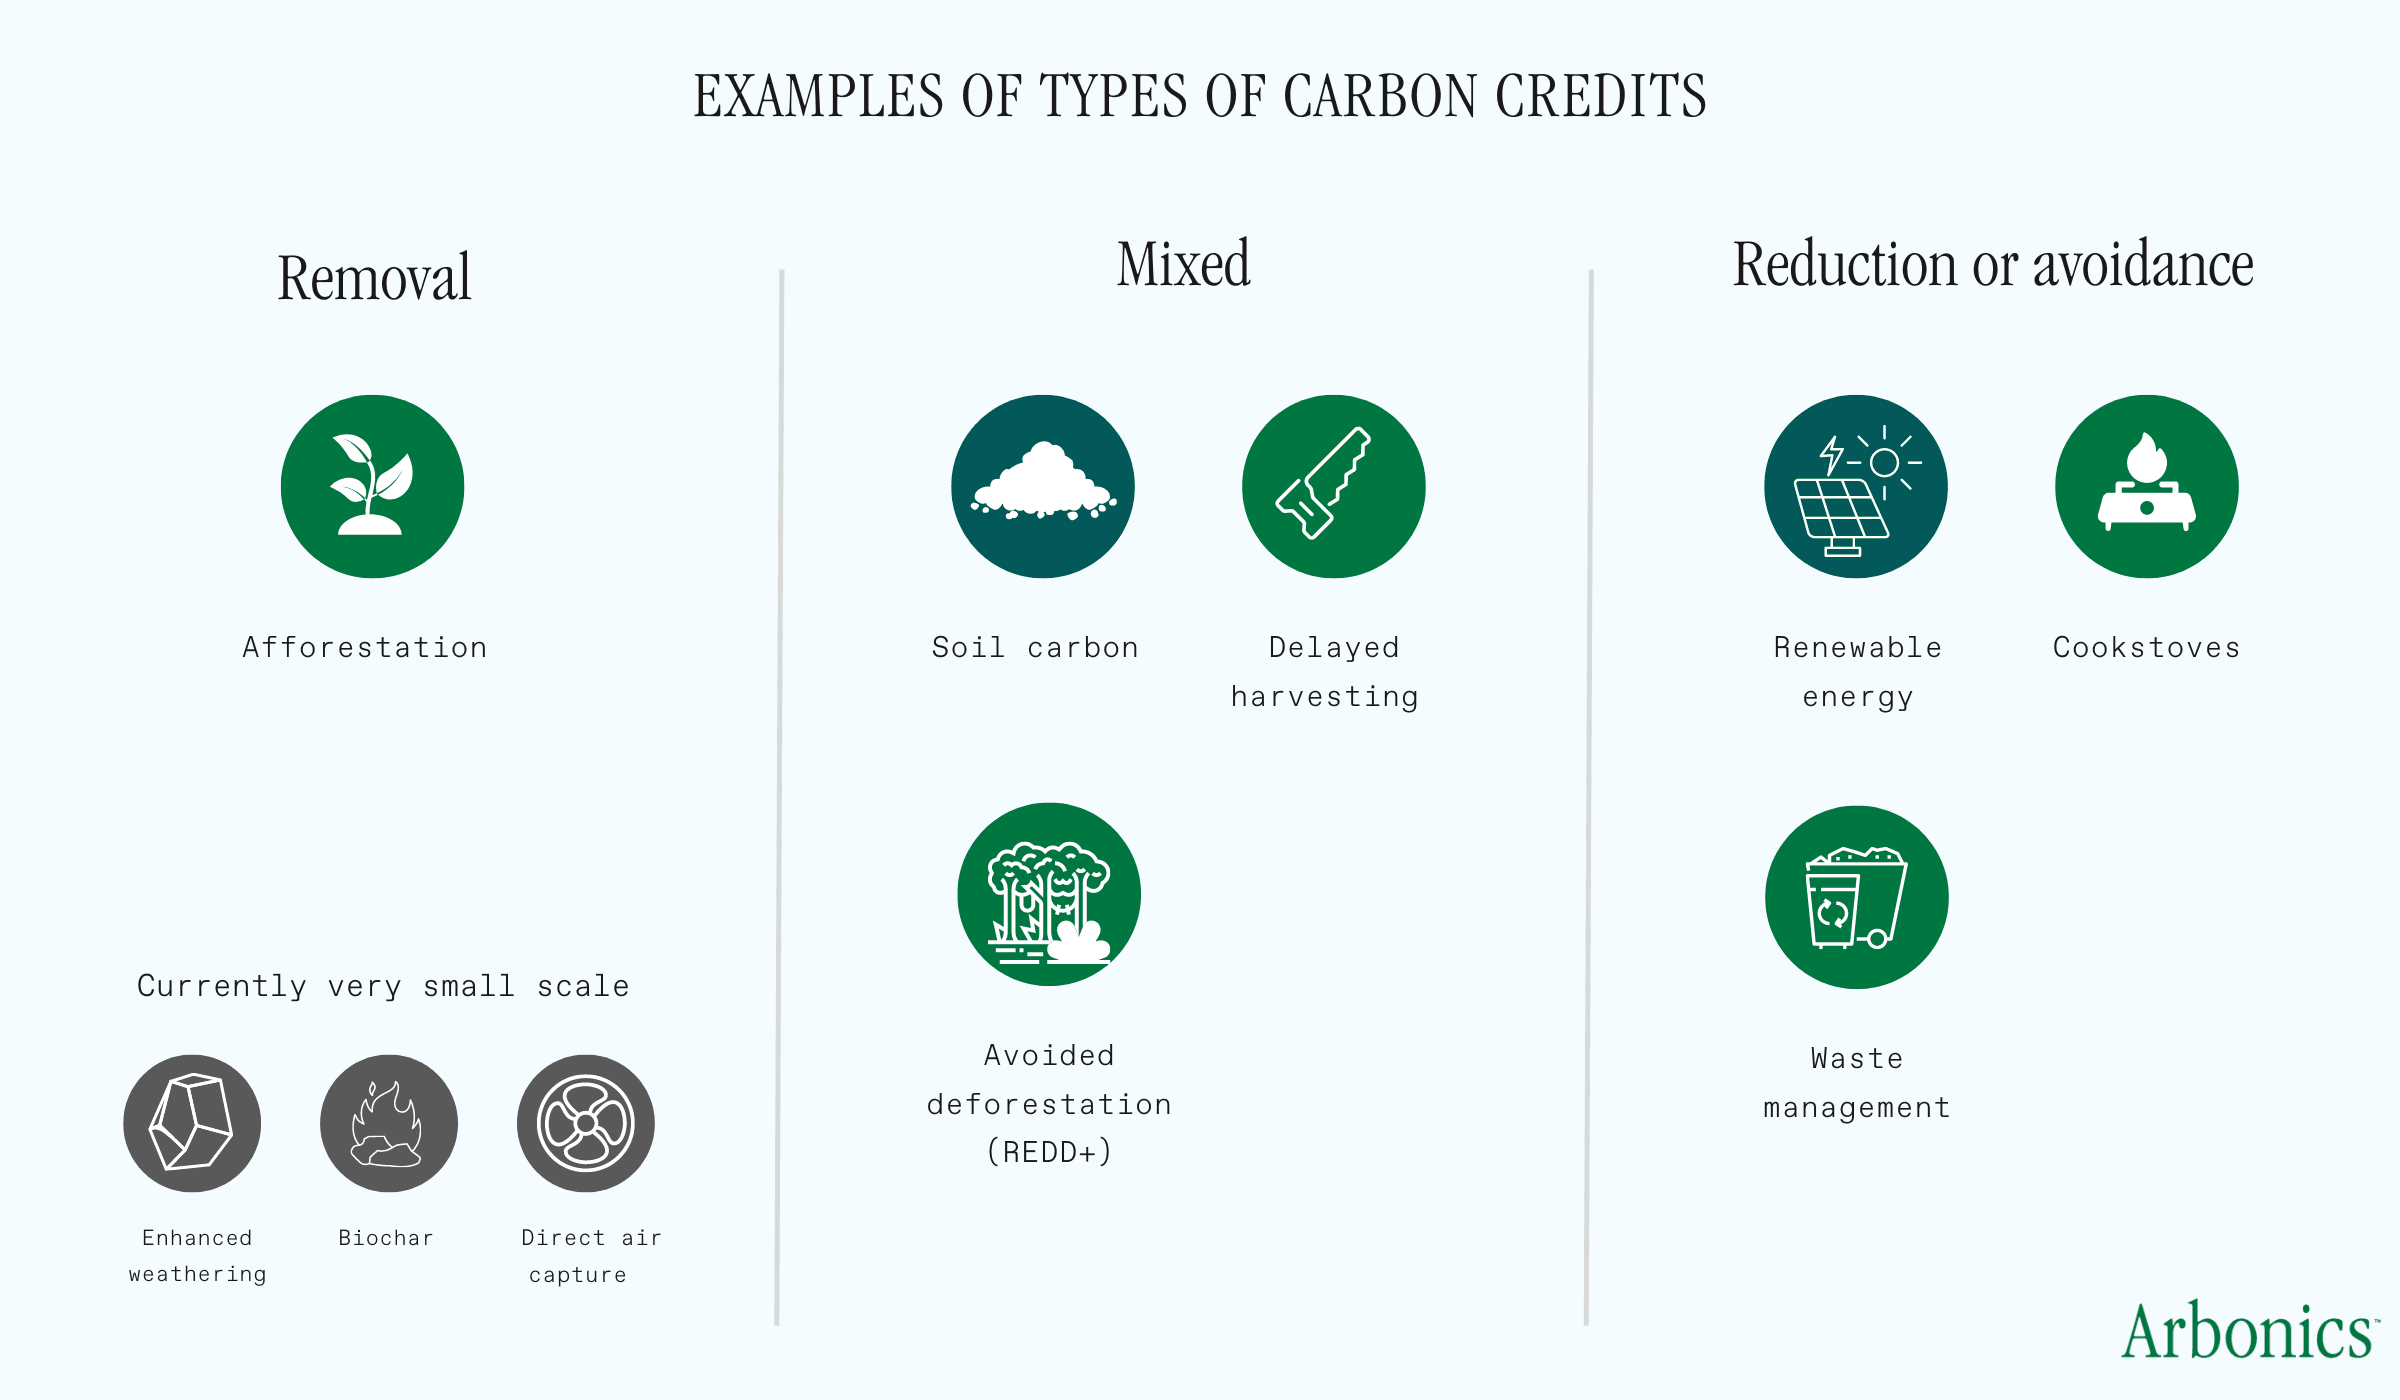 Examples of carbon credits, by different sub-type: removal, mixed, and redution/avoidance